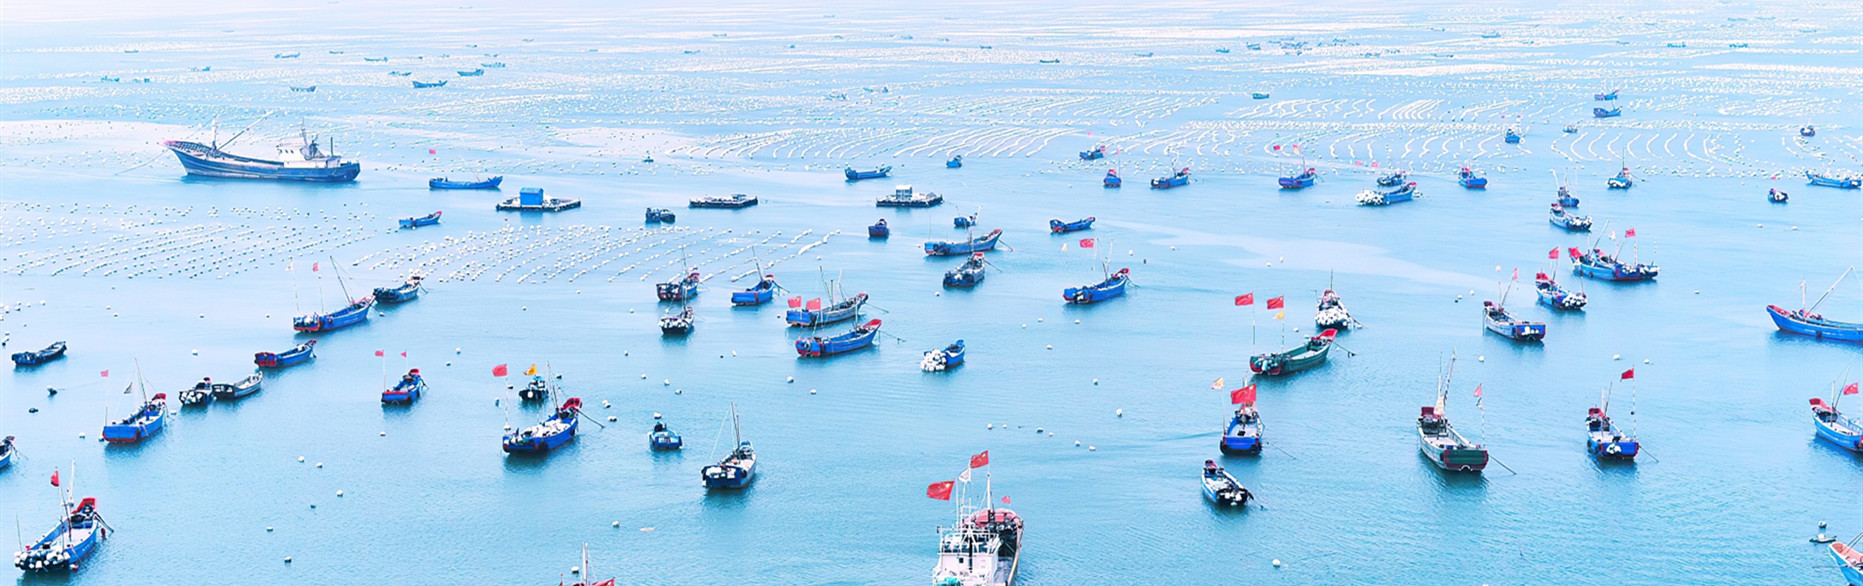 Zhoushan launches annual online fishing festival